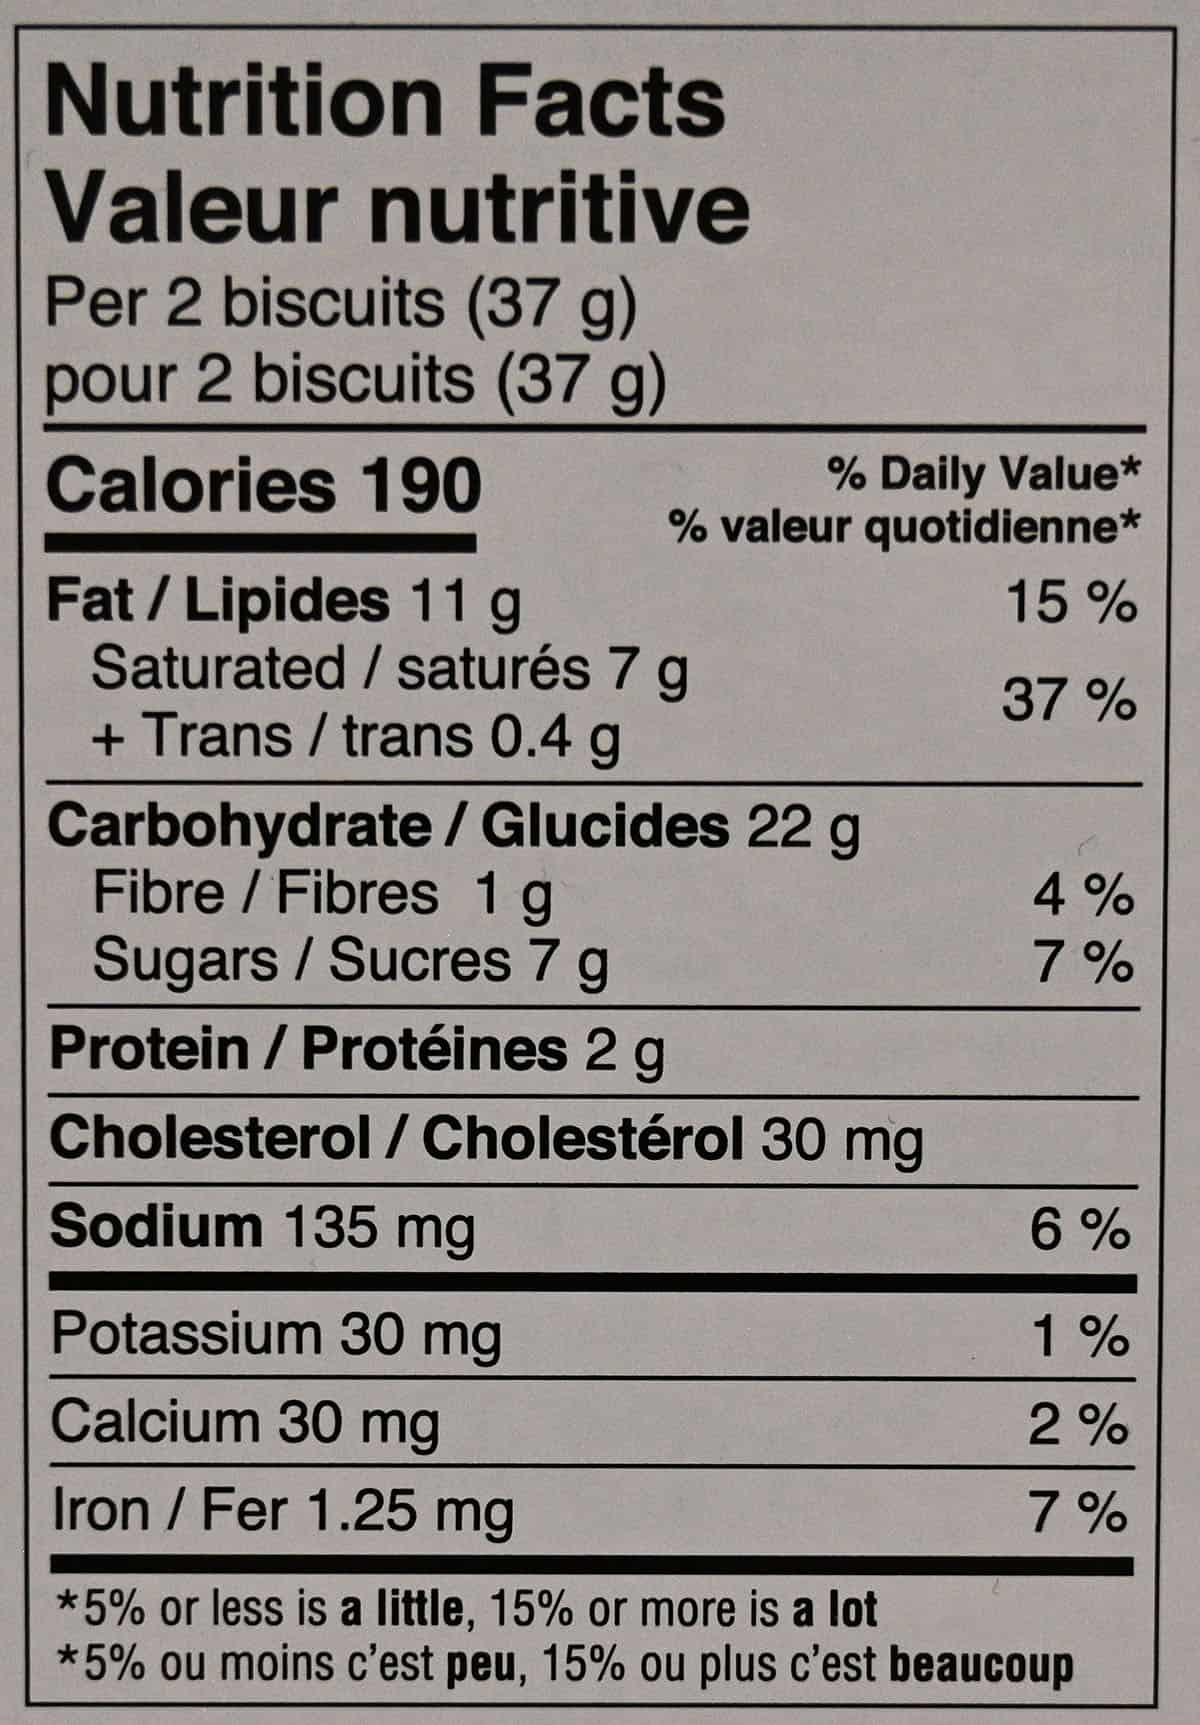 Image of the nutrition facts label from the tin.